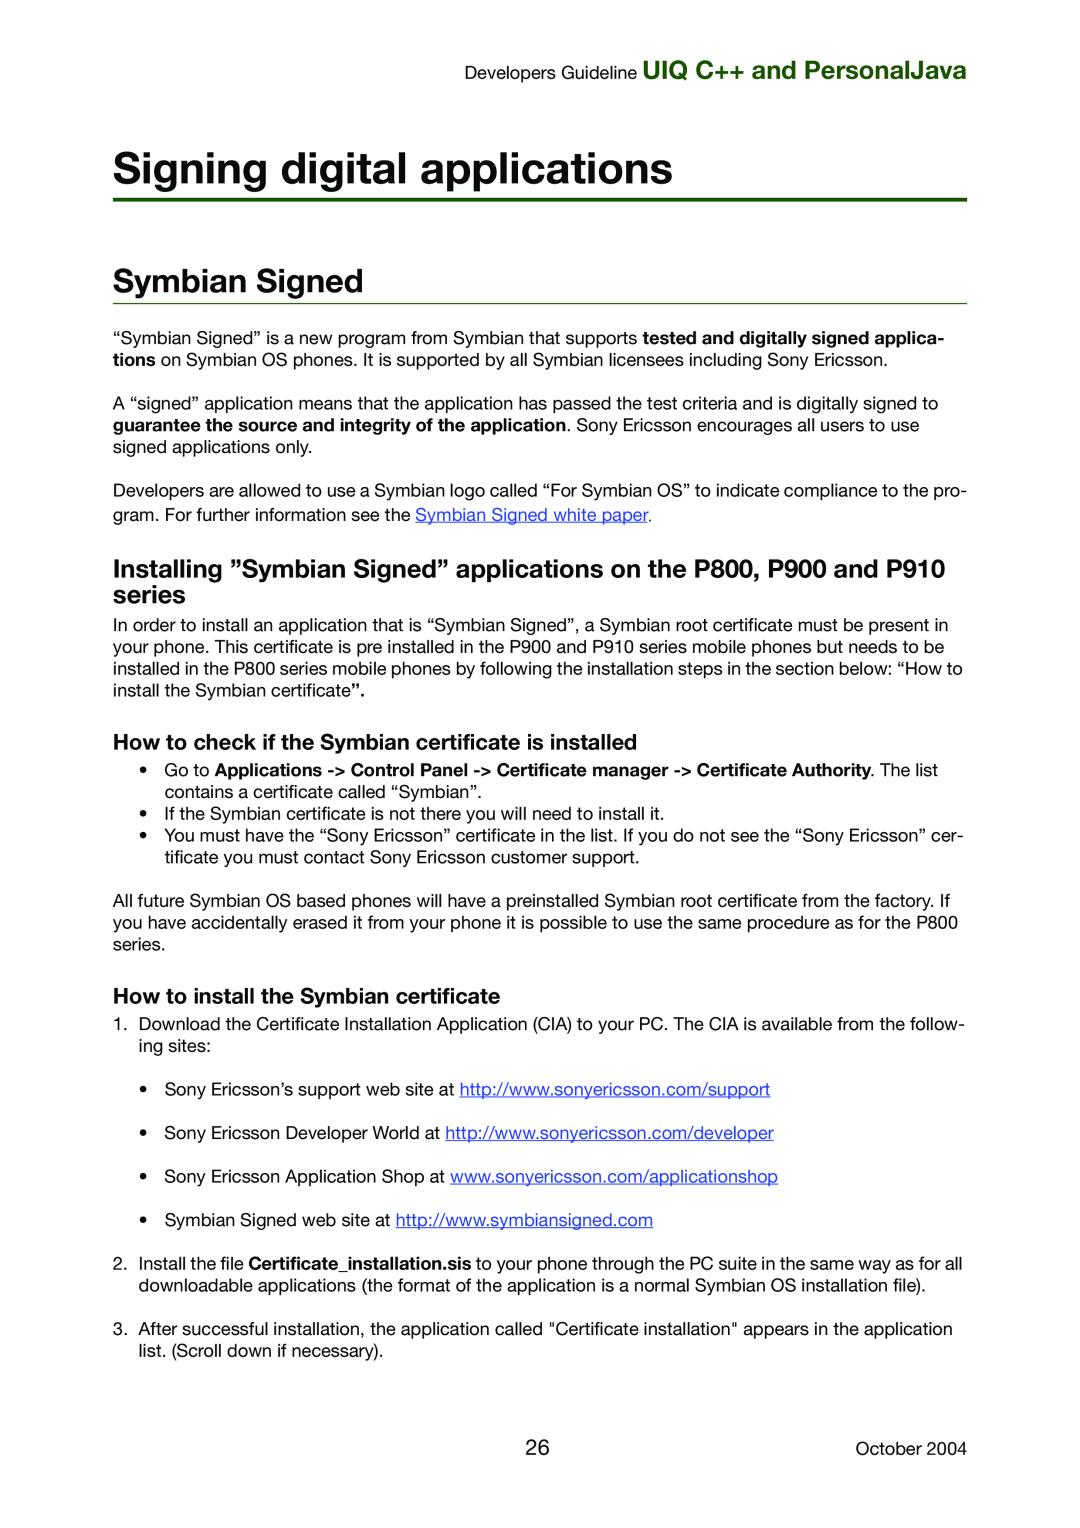 Sony Ericsson P900 Signing digital applications, Symbian Signed, How to check if the Symbian certificate is installed 